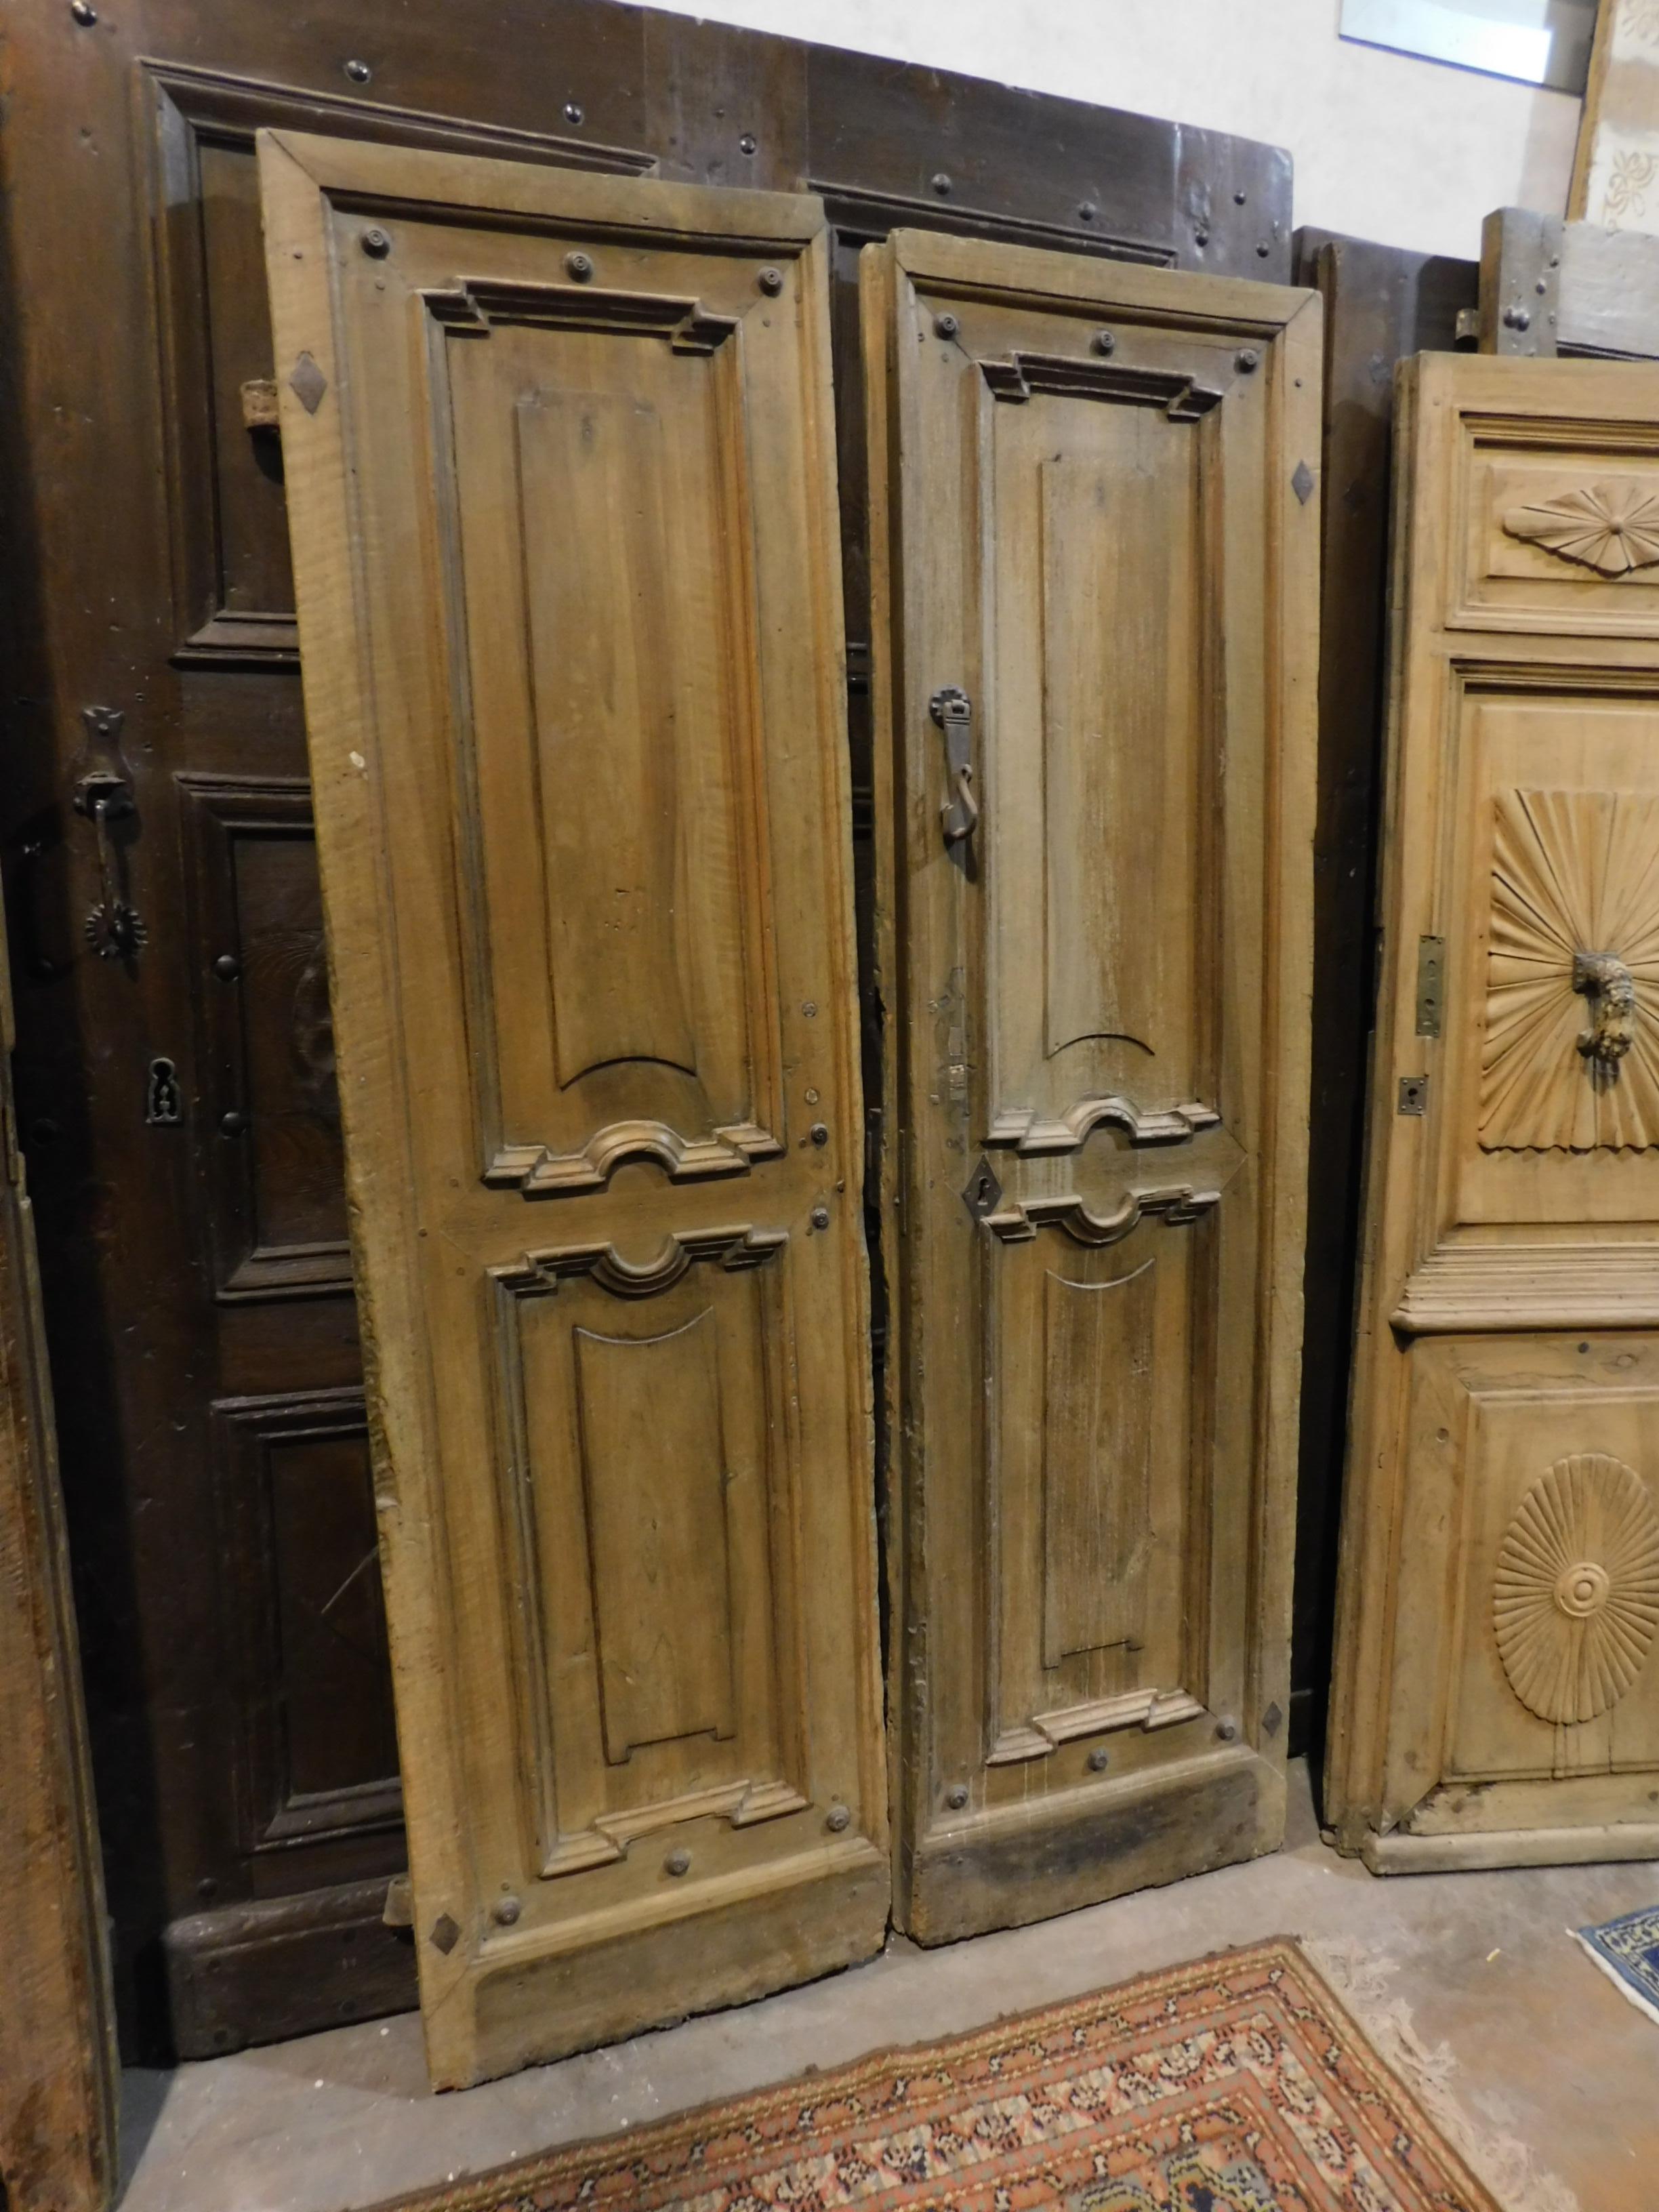 Antique double-leaf entrance door, hand carved in precious light brown walnut wood, hand-built in the 19th century by artisans in Italy.
Beautiful and of great character, clear and suitable for all historical or modern entrances. with particular